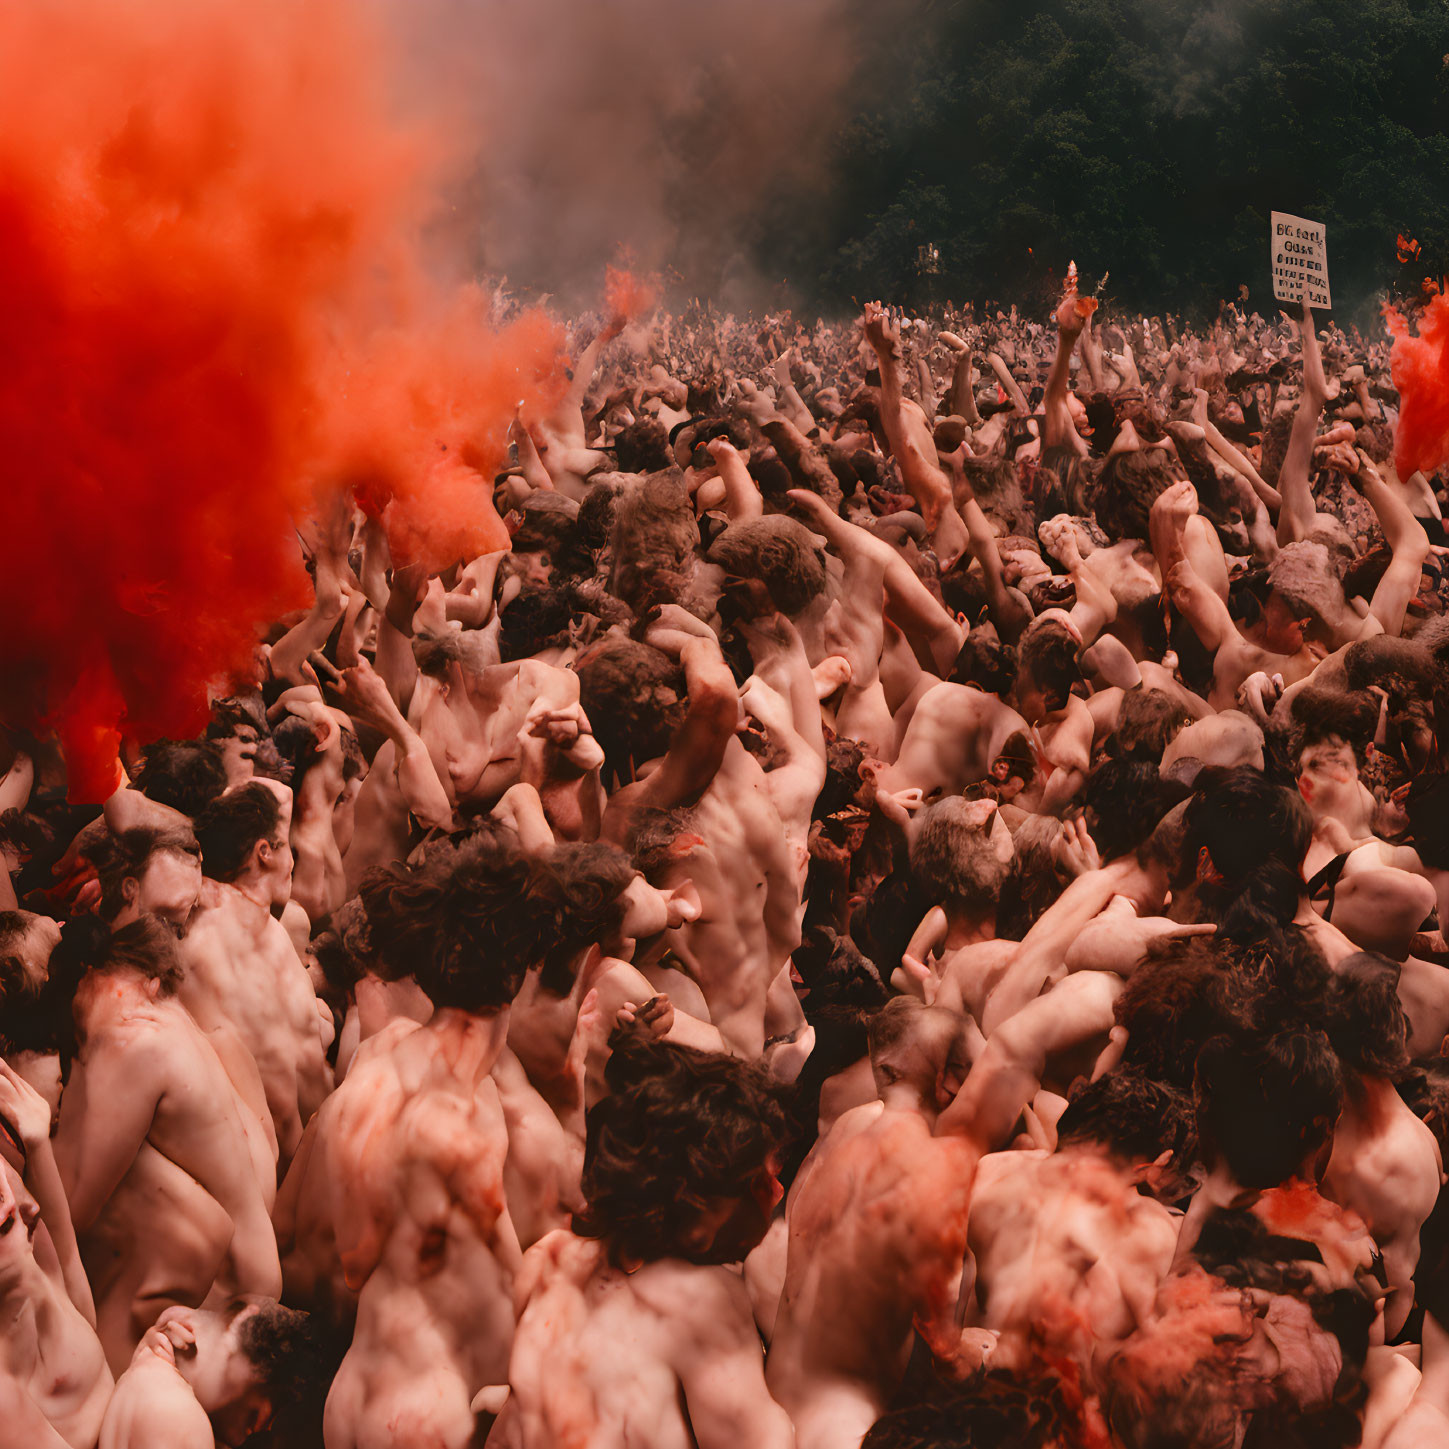 Crowded gathering in orange smoke with shirtless people and raised arms